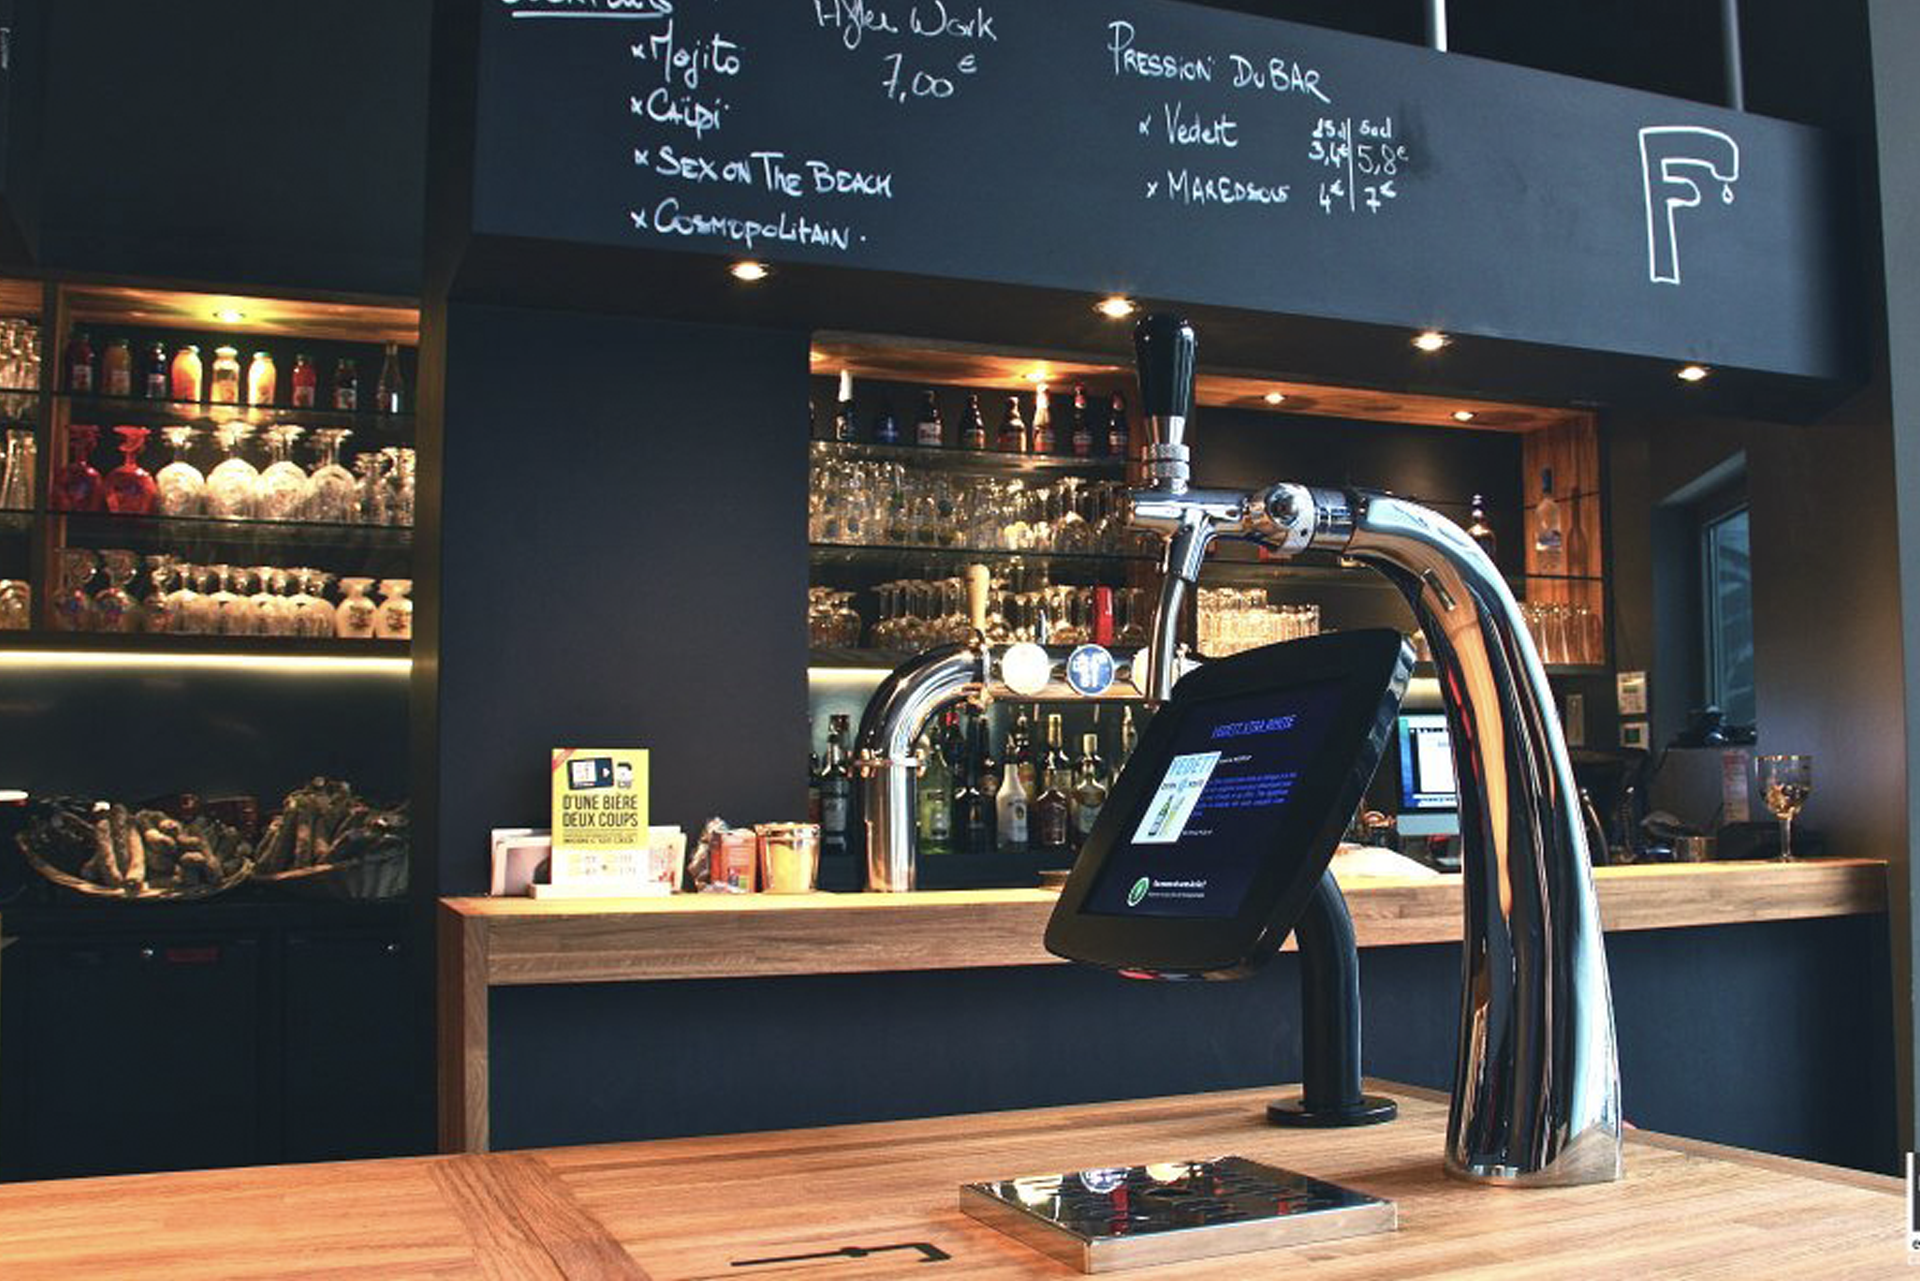 Self-serve beer tap on table in a bar